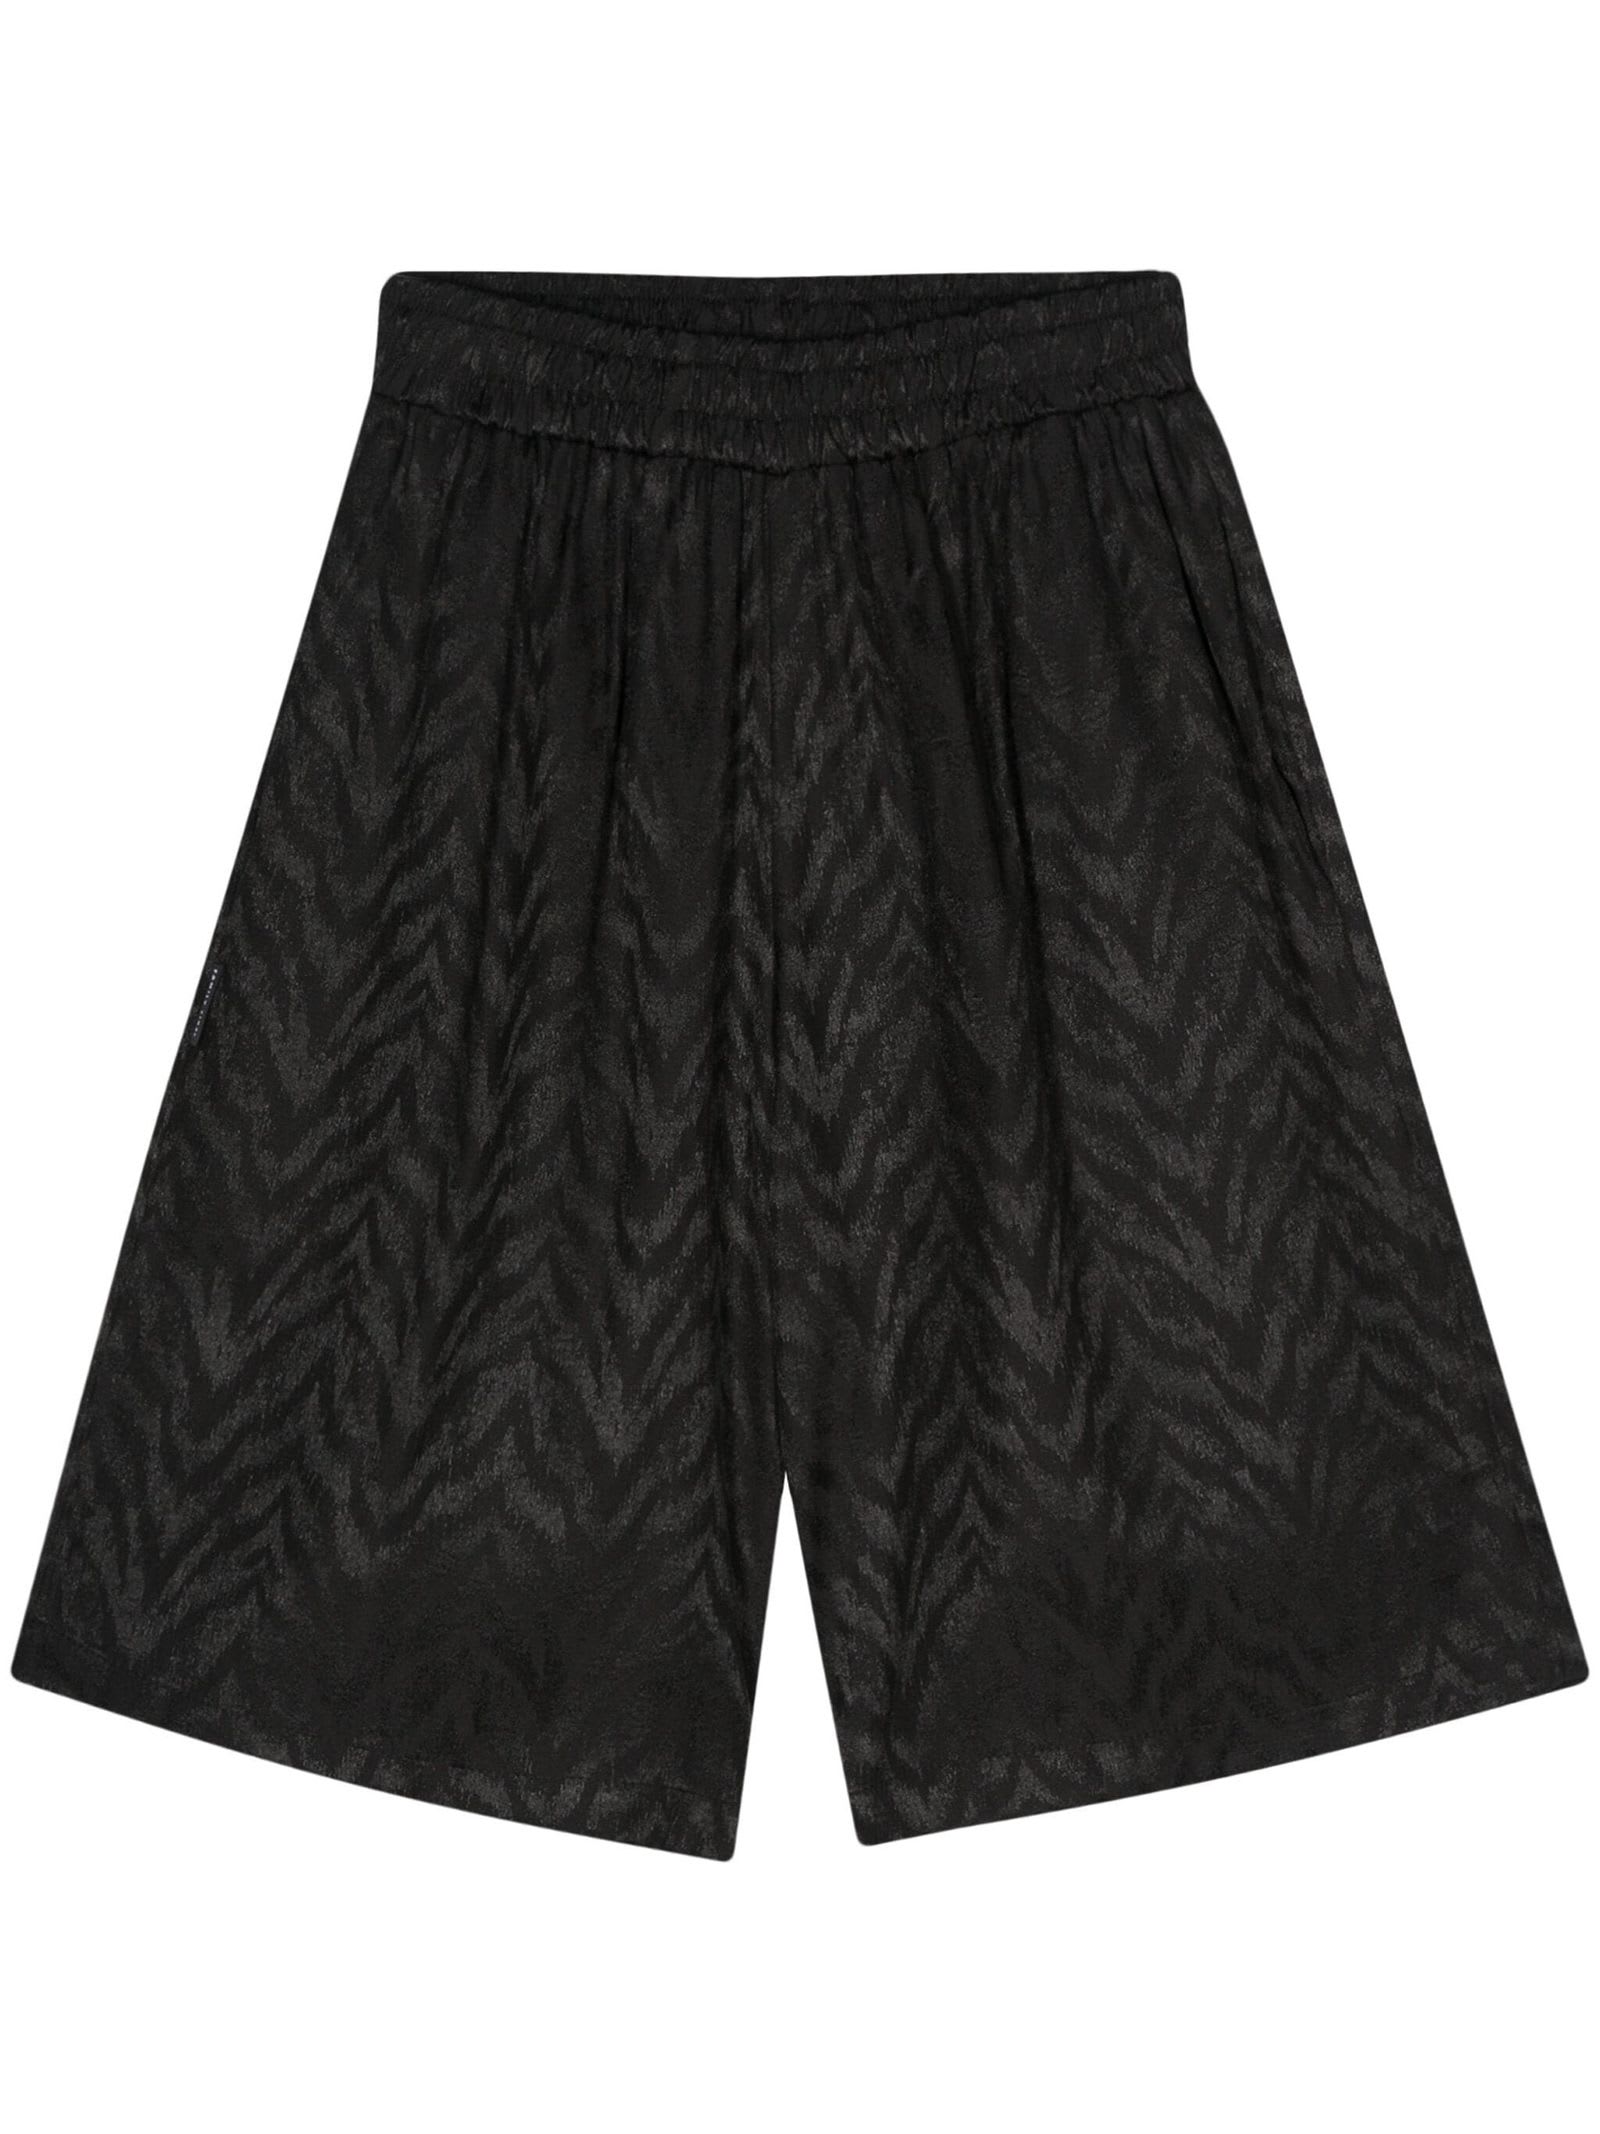 Family First Shorts Black